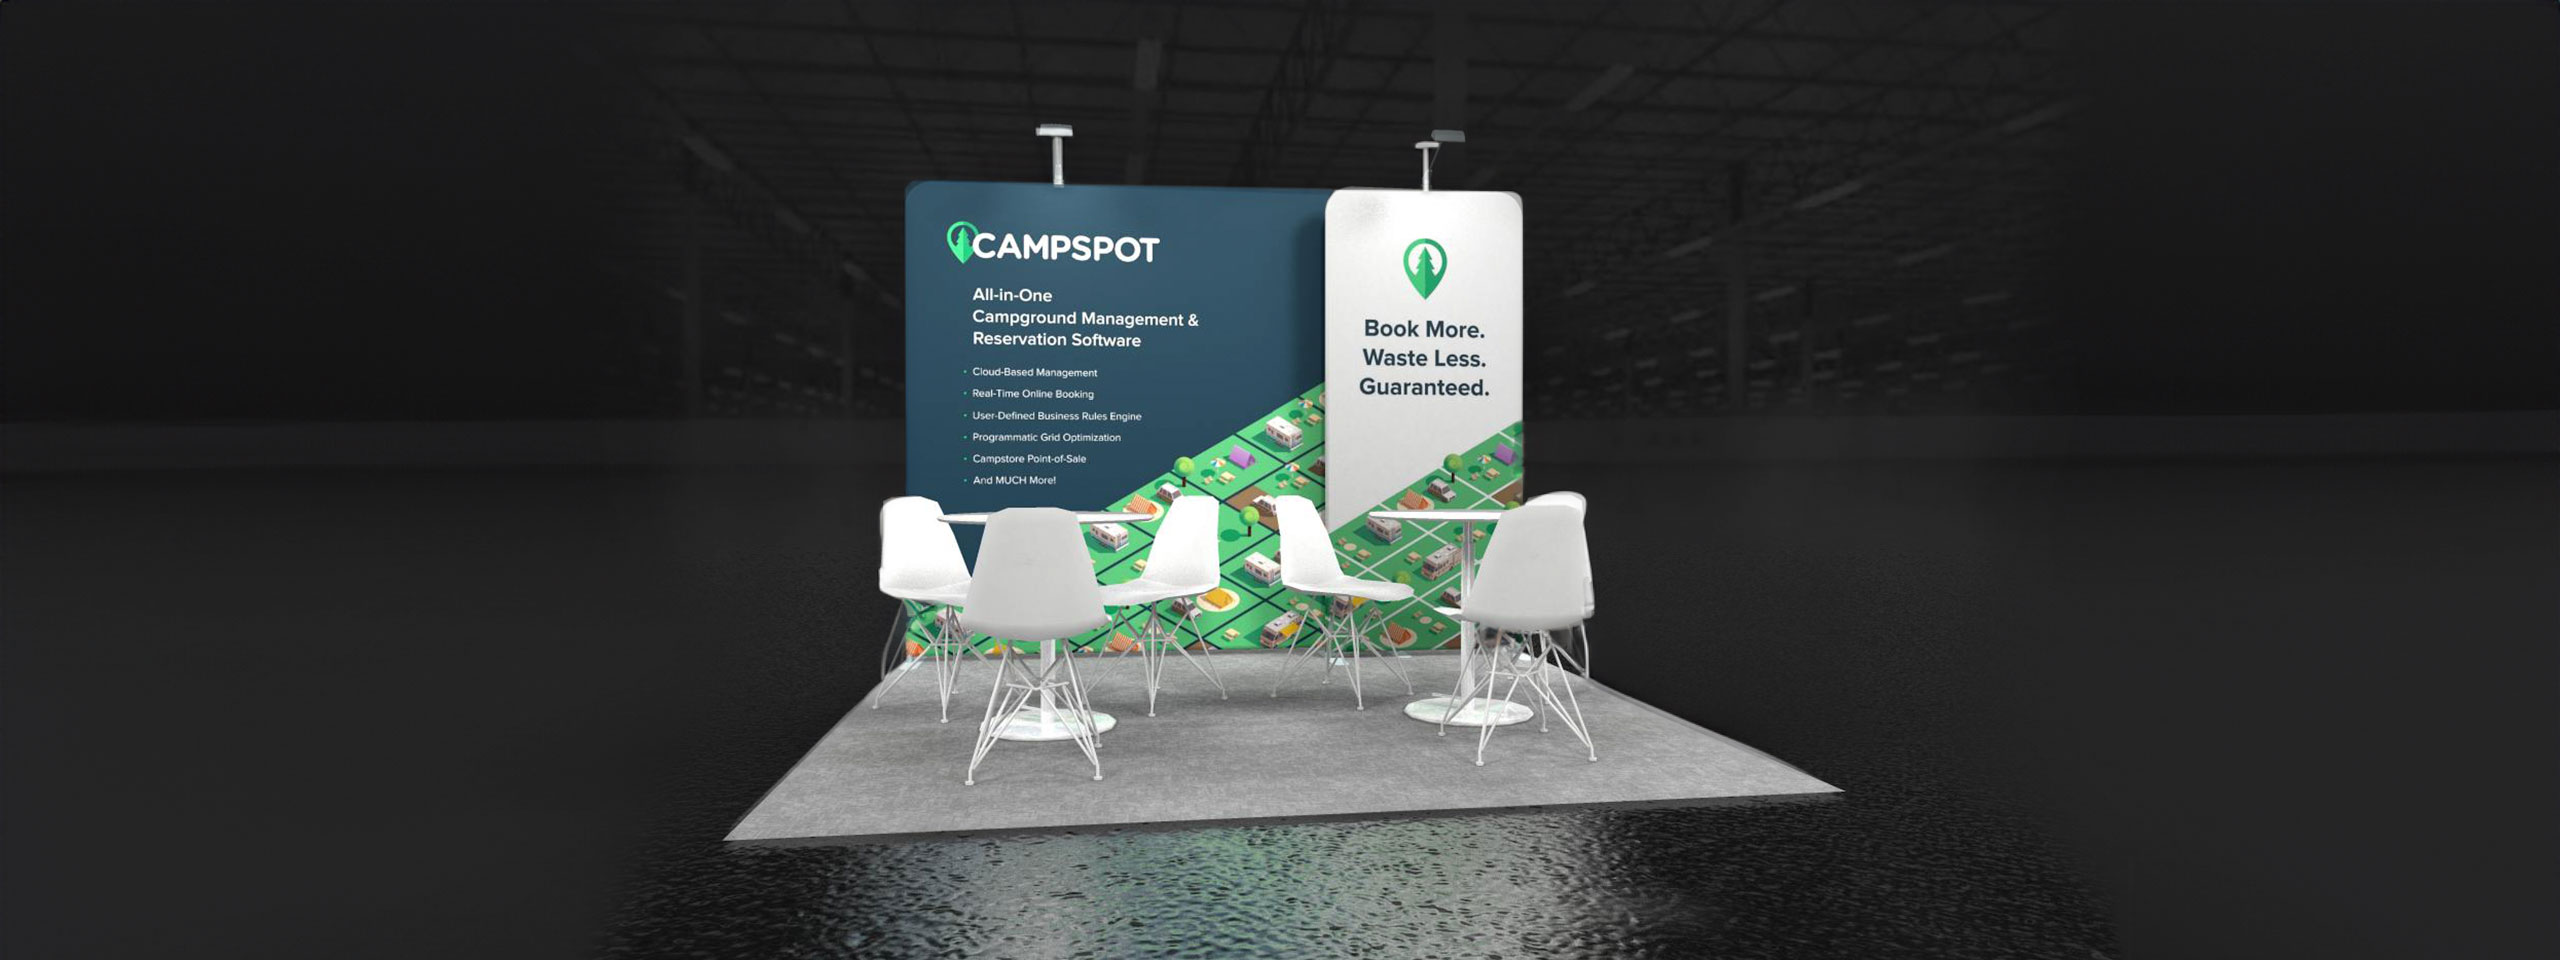 3D tradeshow booth render for Campspot